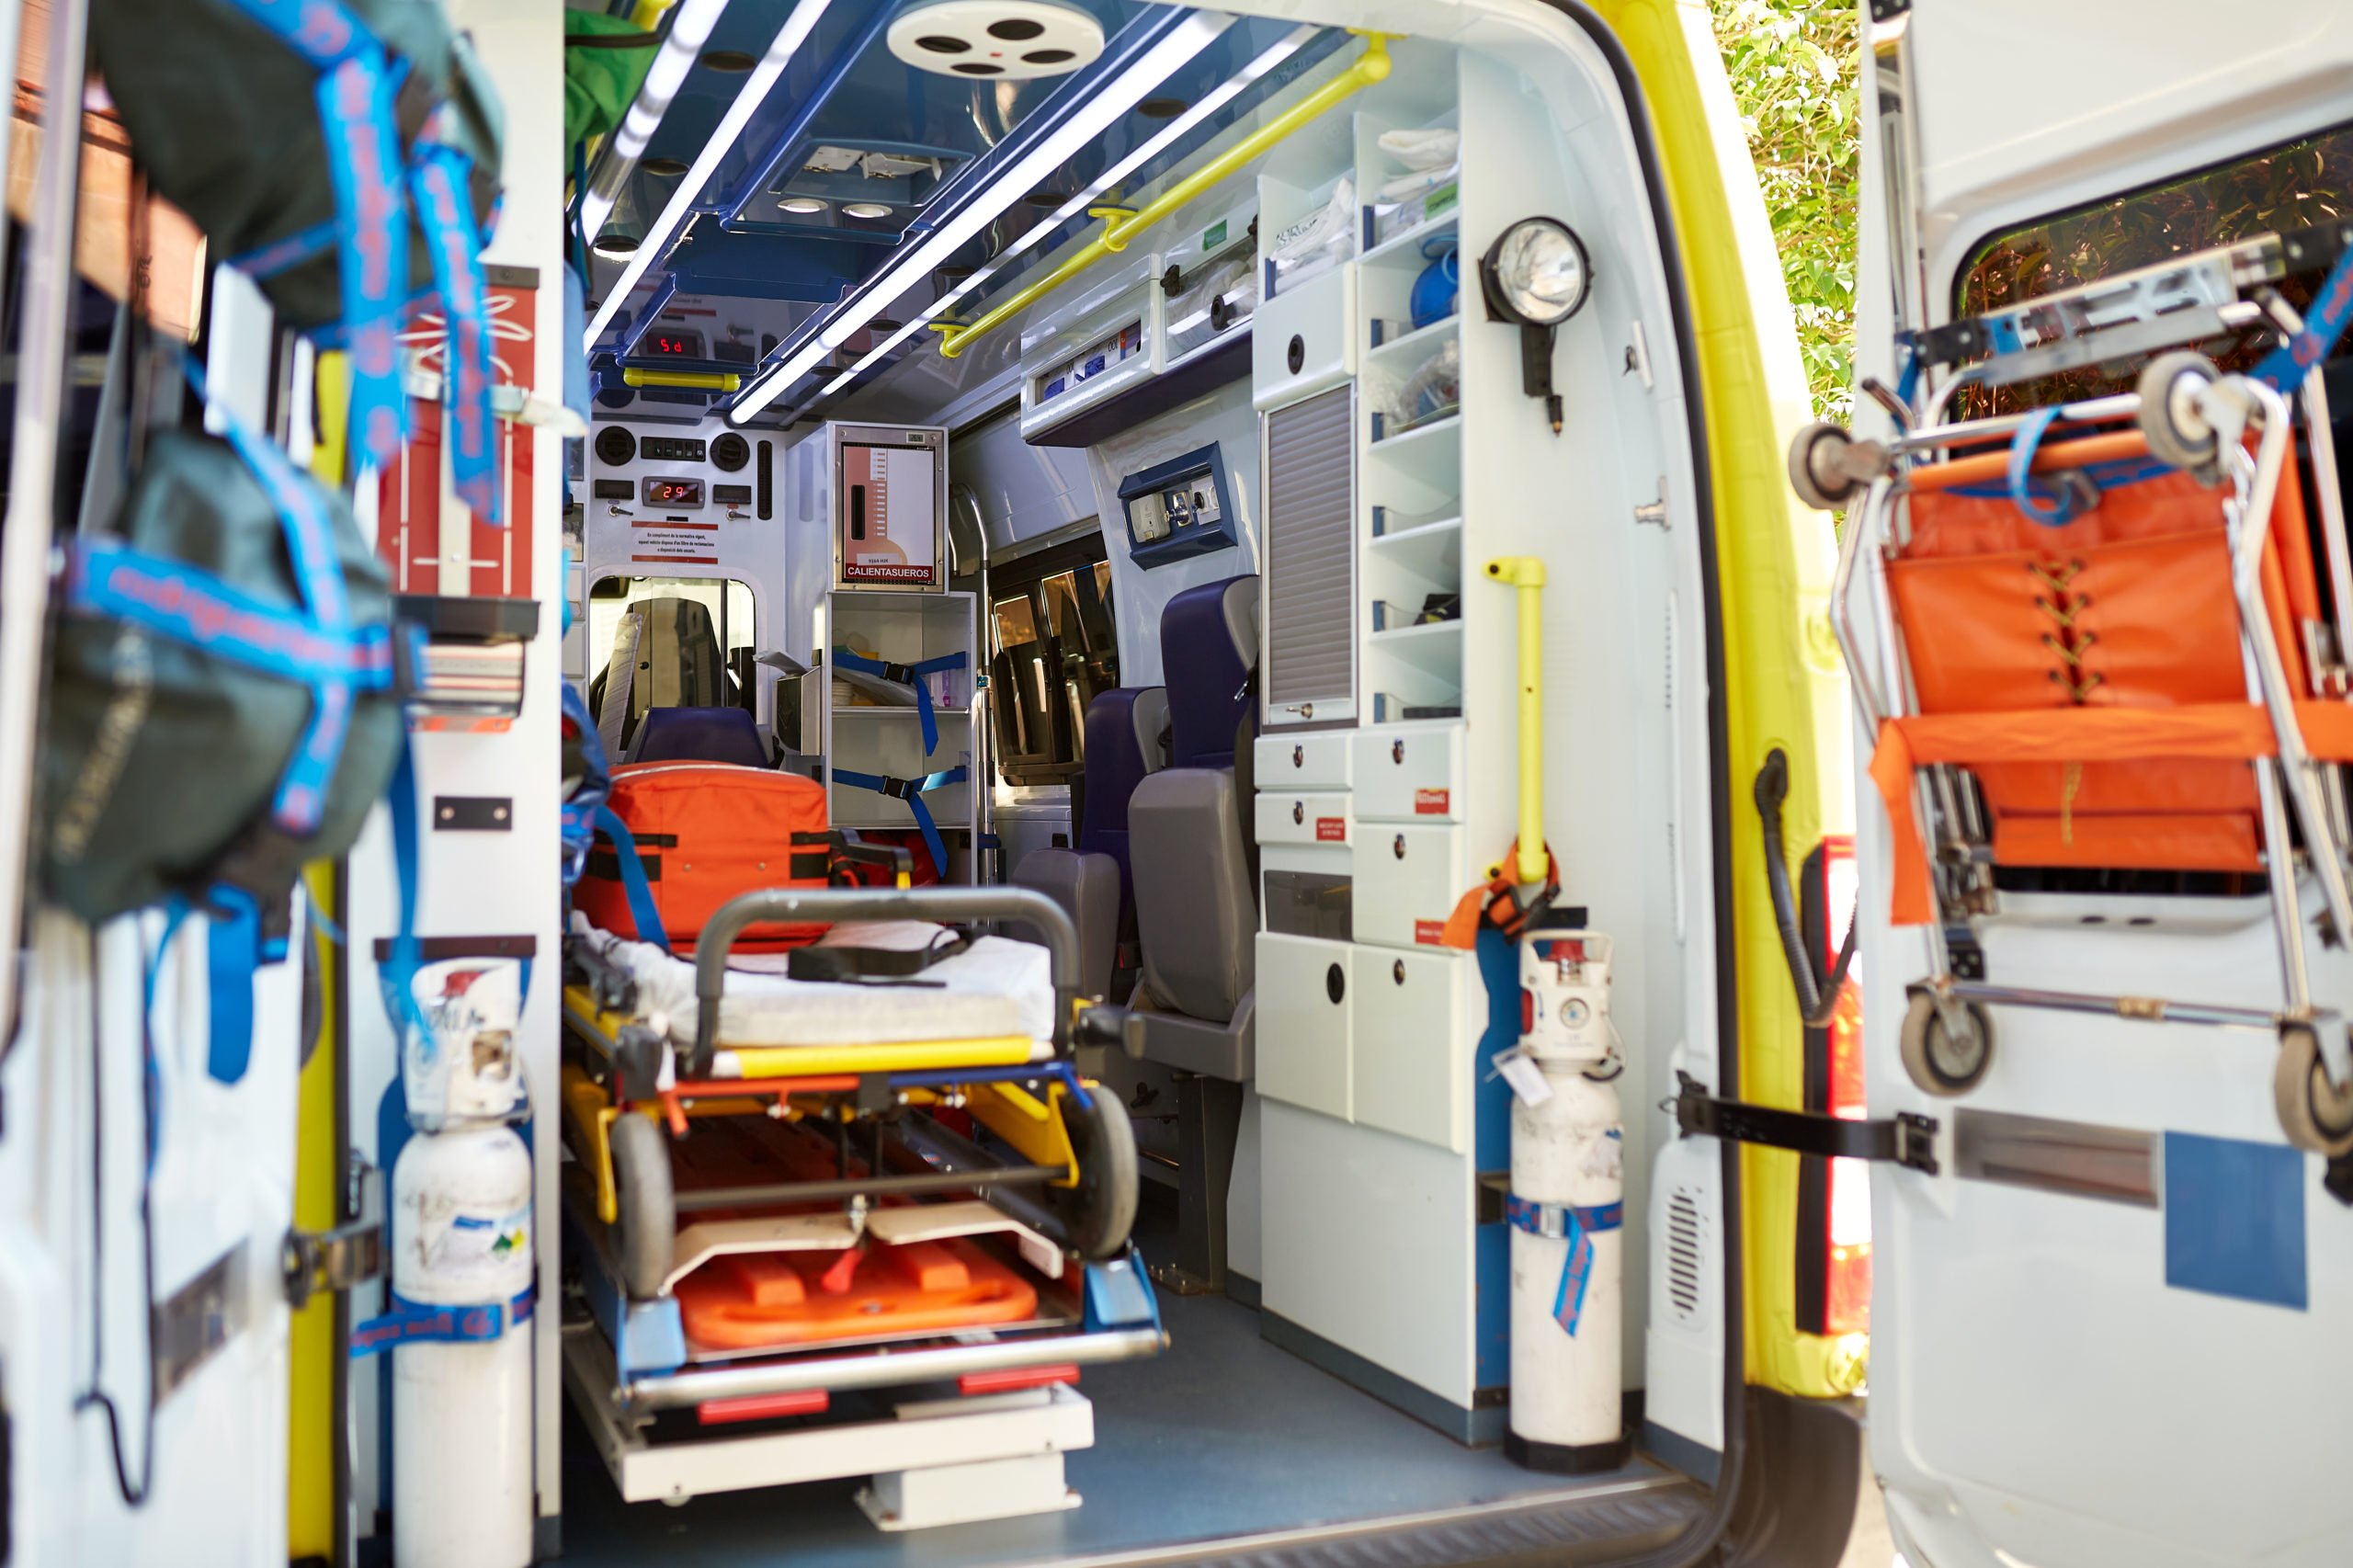 The inside of an ambulance, representing the importance of emergency response.